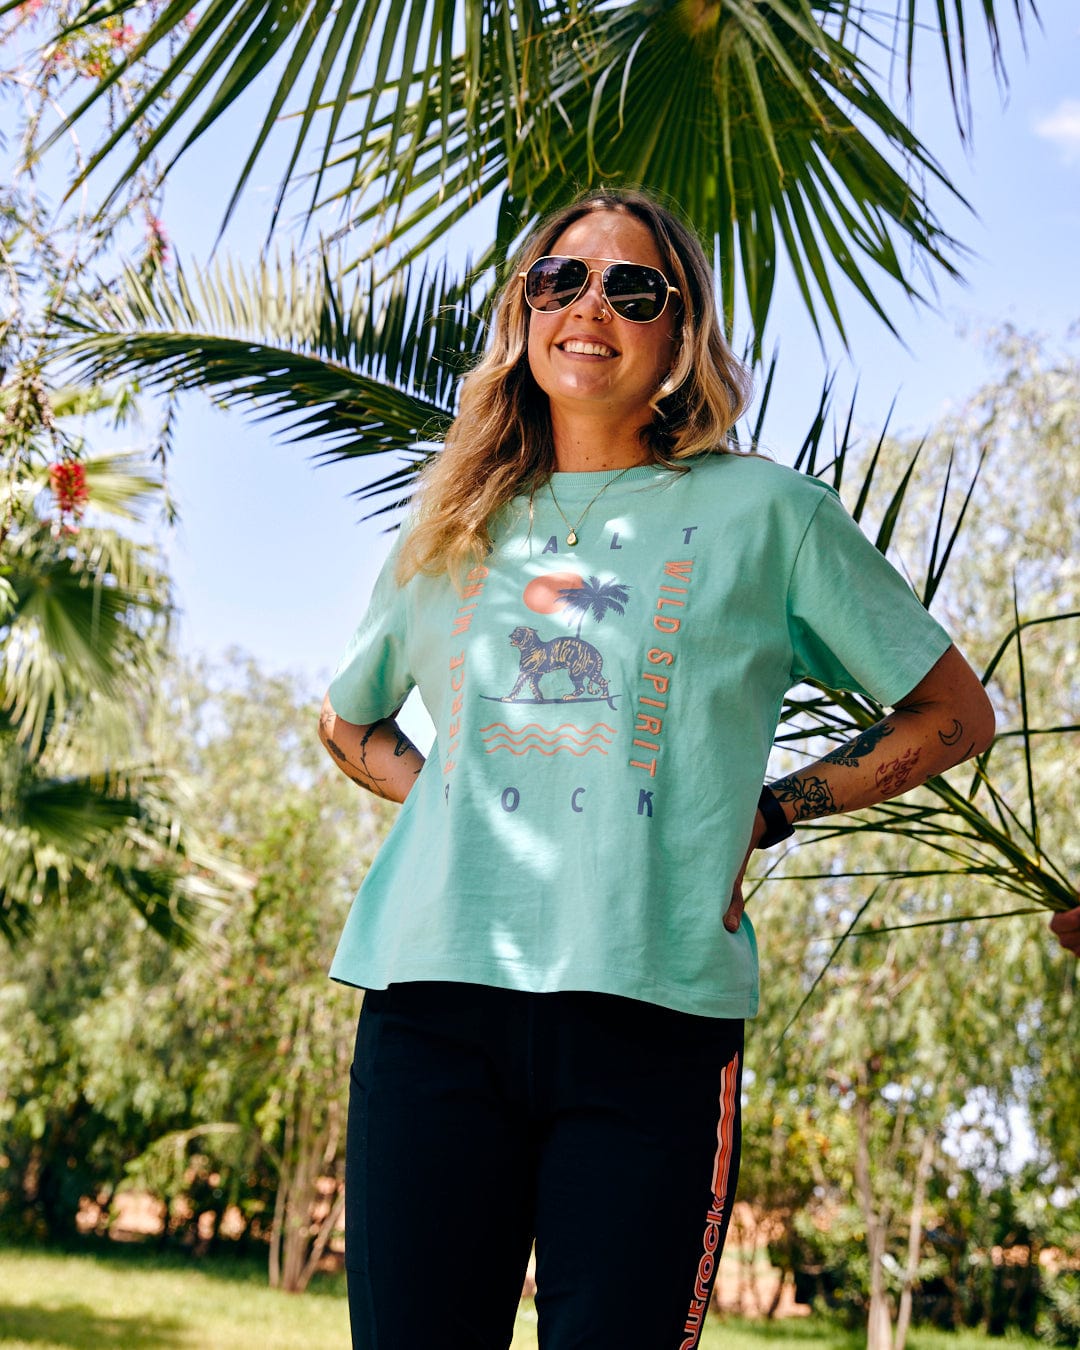 A woman stands smiling under palm trees, wearing a teal Saltrock Fierce Mind - Womens Boxy T-Shirt - Green, sunglasses, and black trousers, with her hands in her pockets.